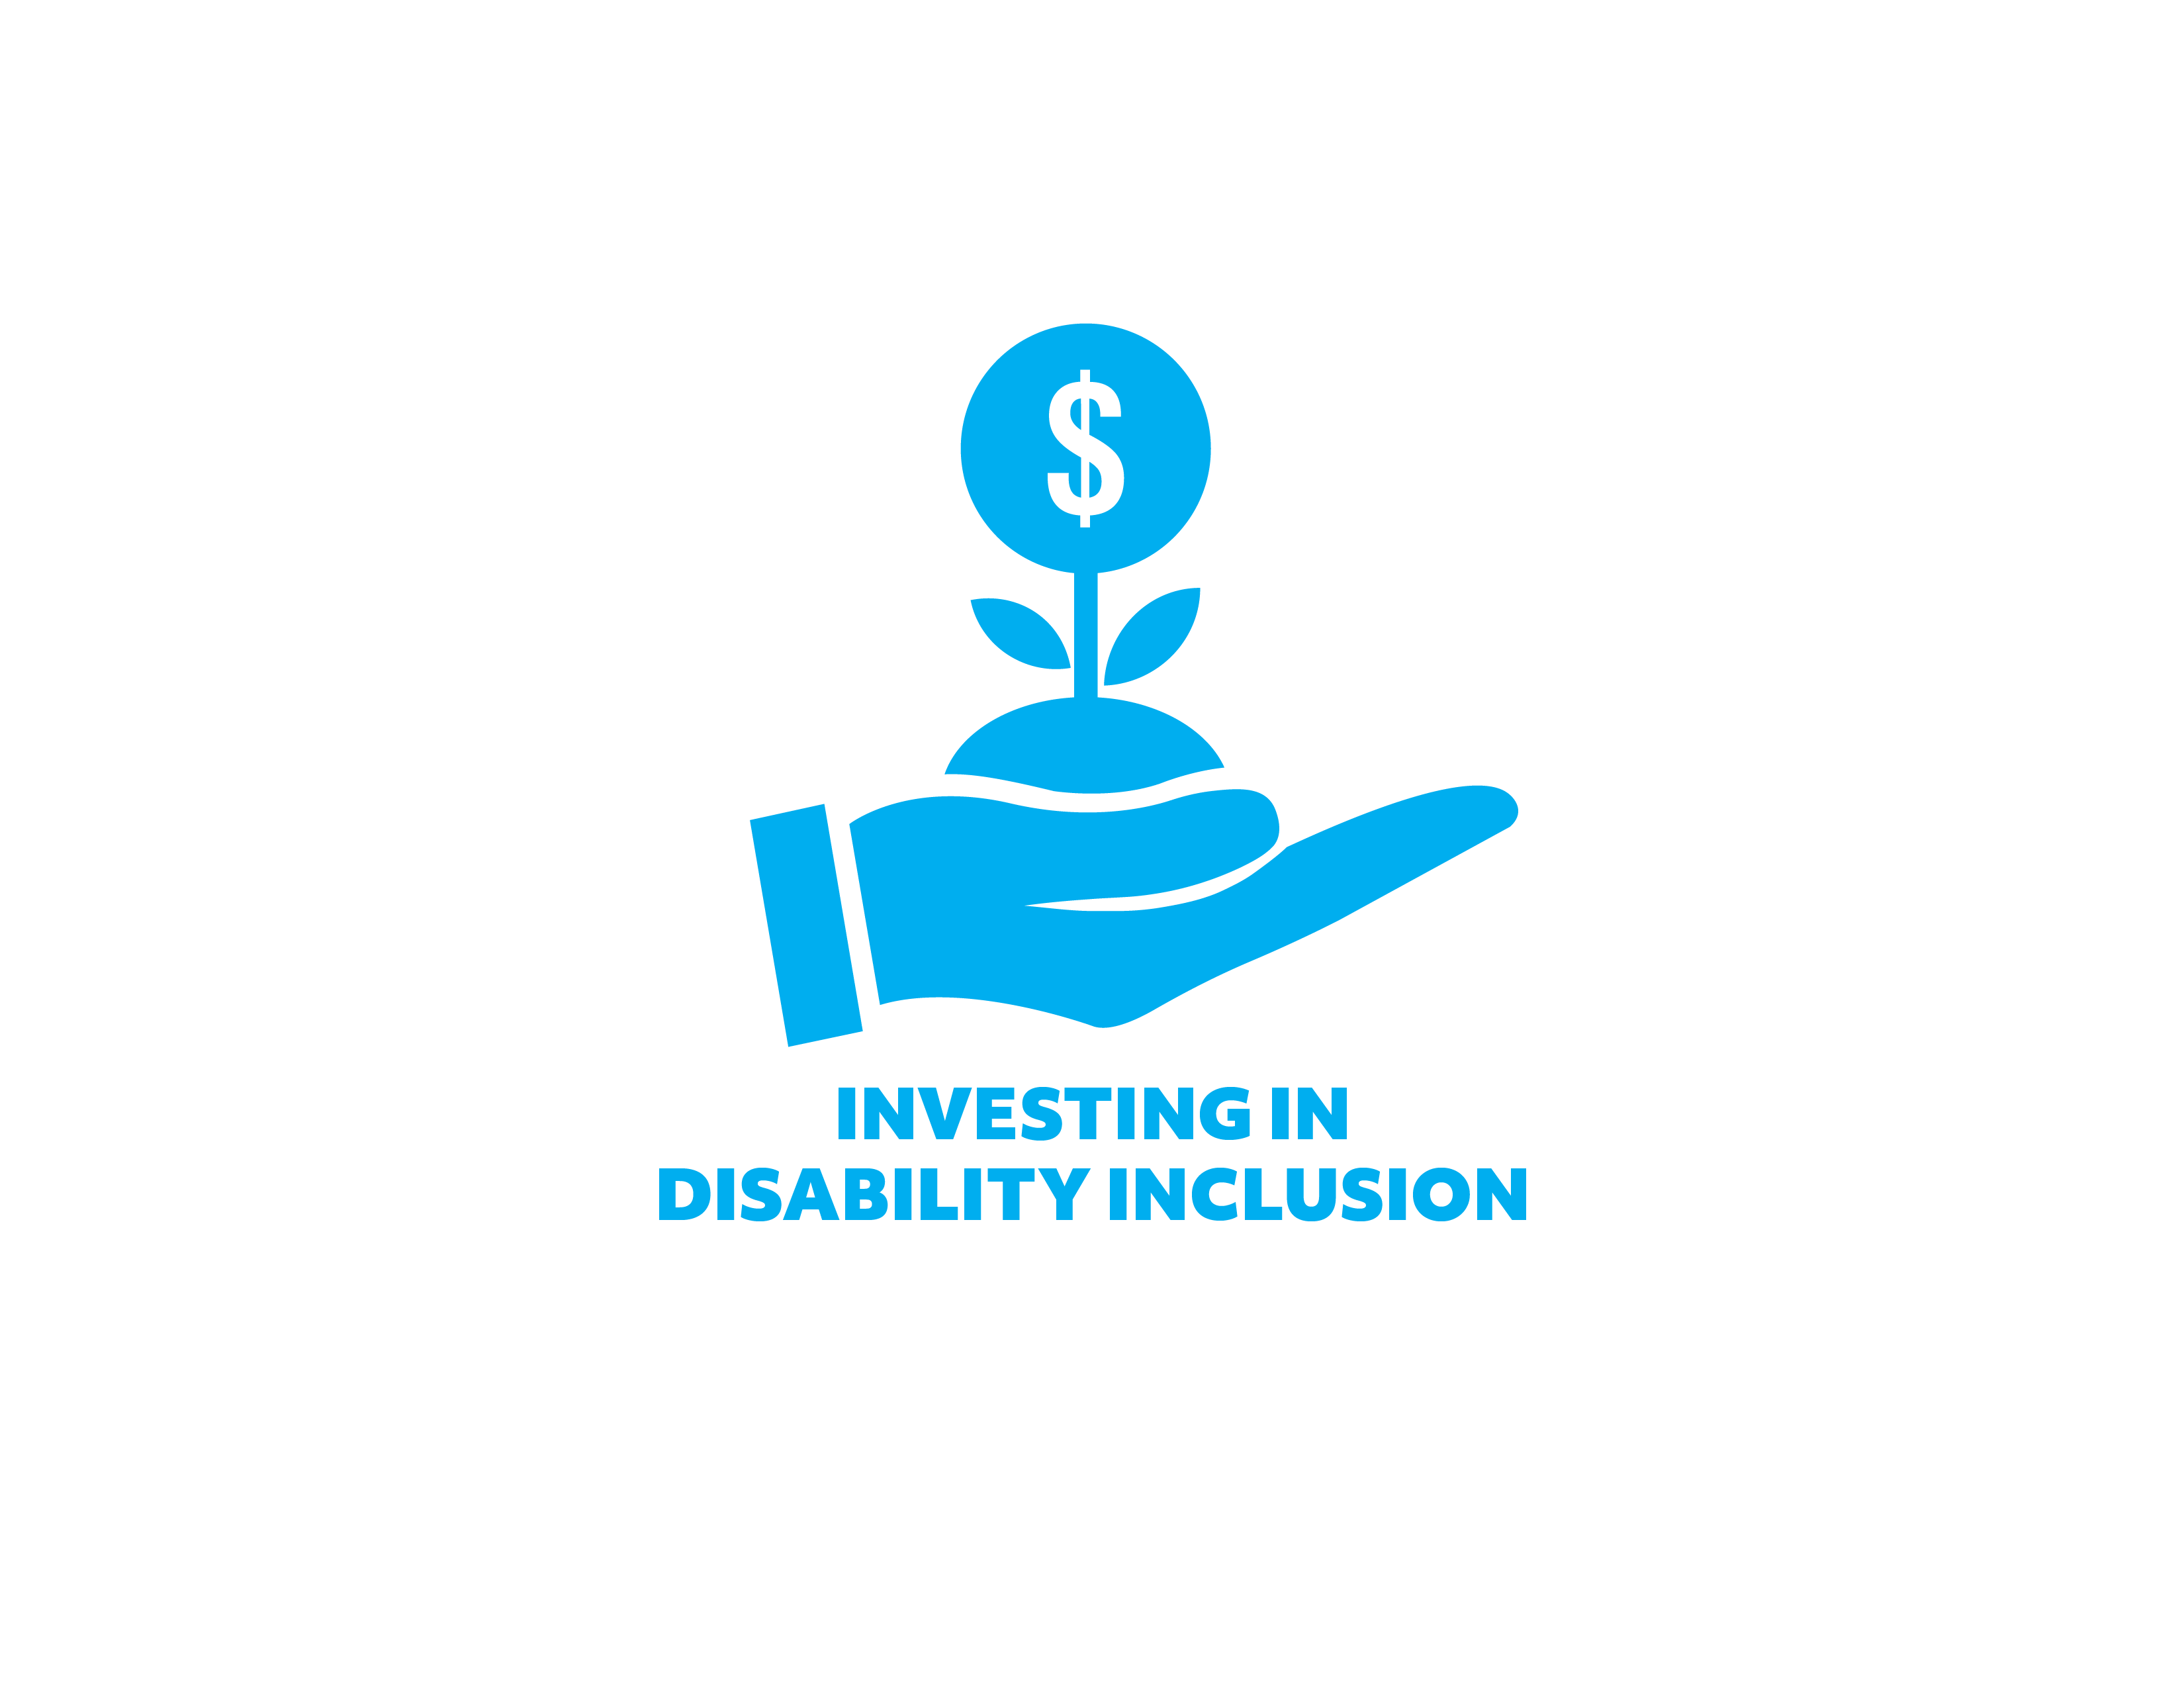 Investing in Inclusion icon with hand holding money tree